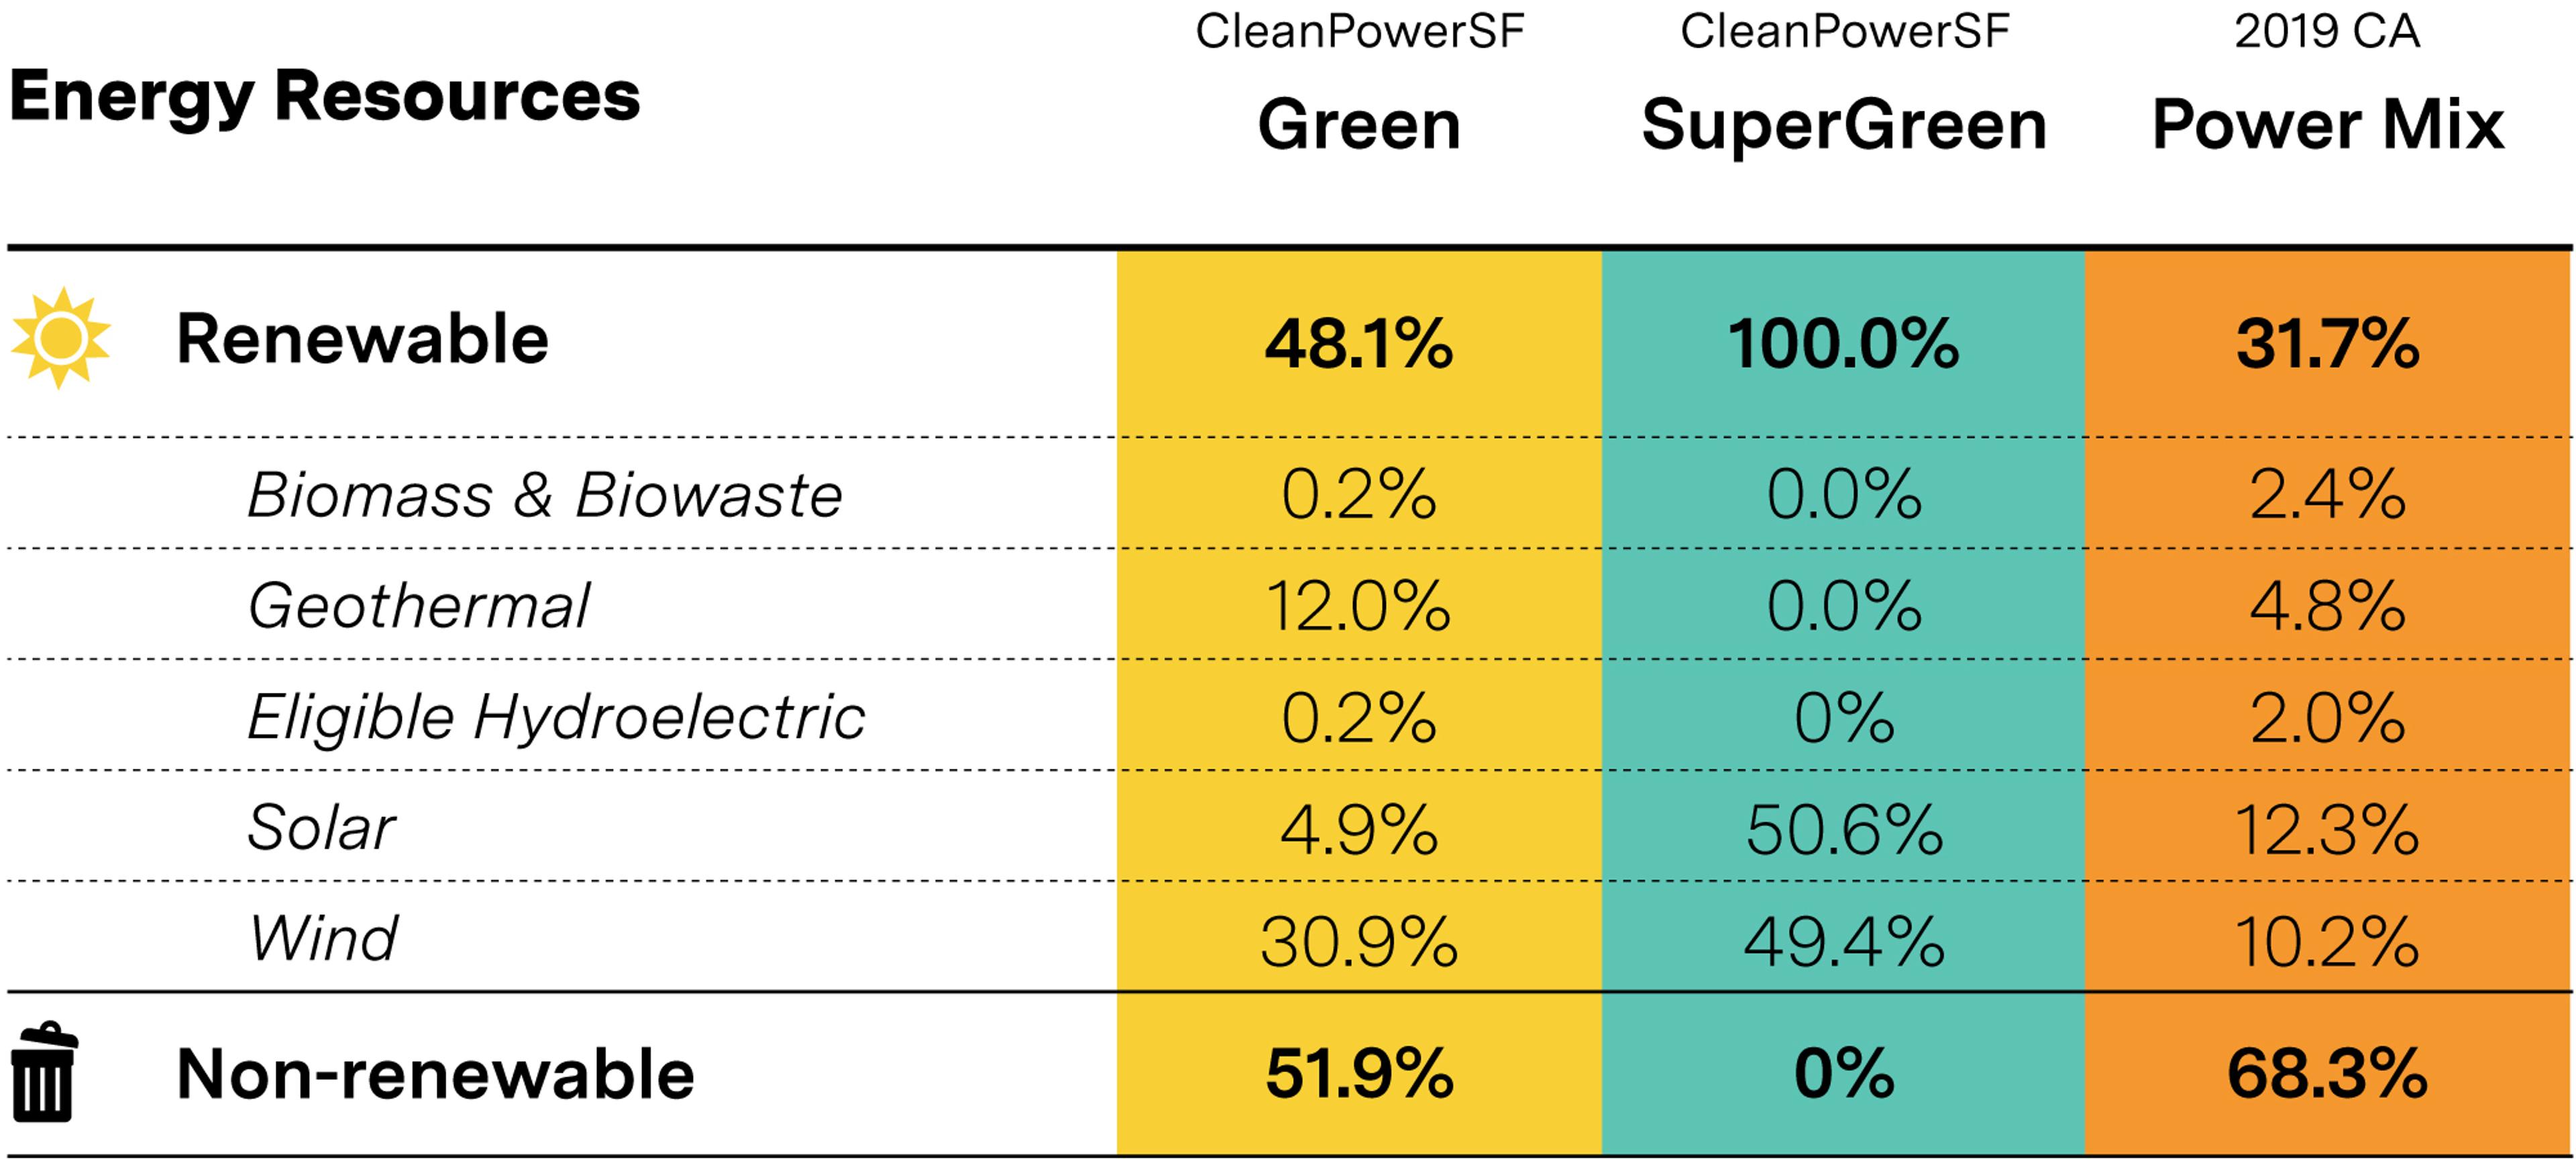 Table of clean power options in San Francisco